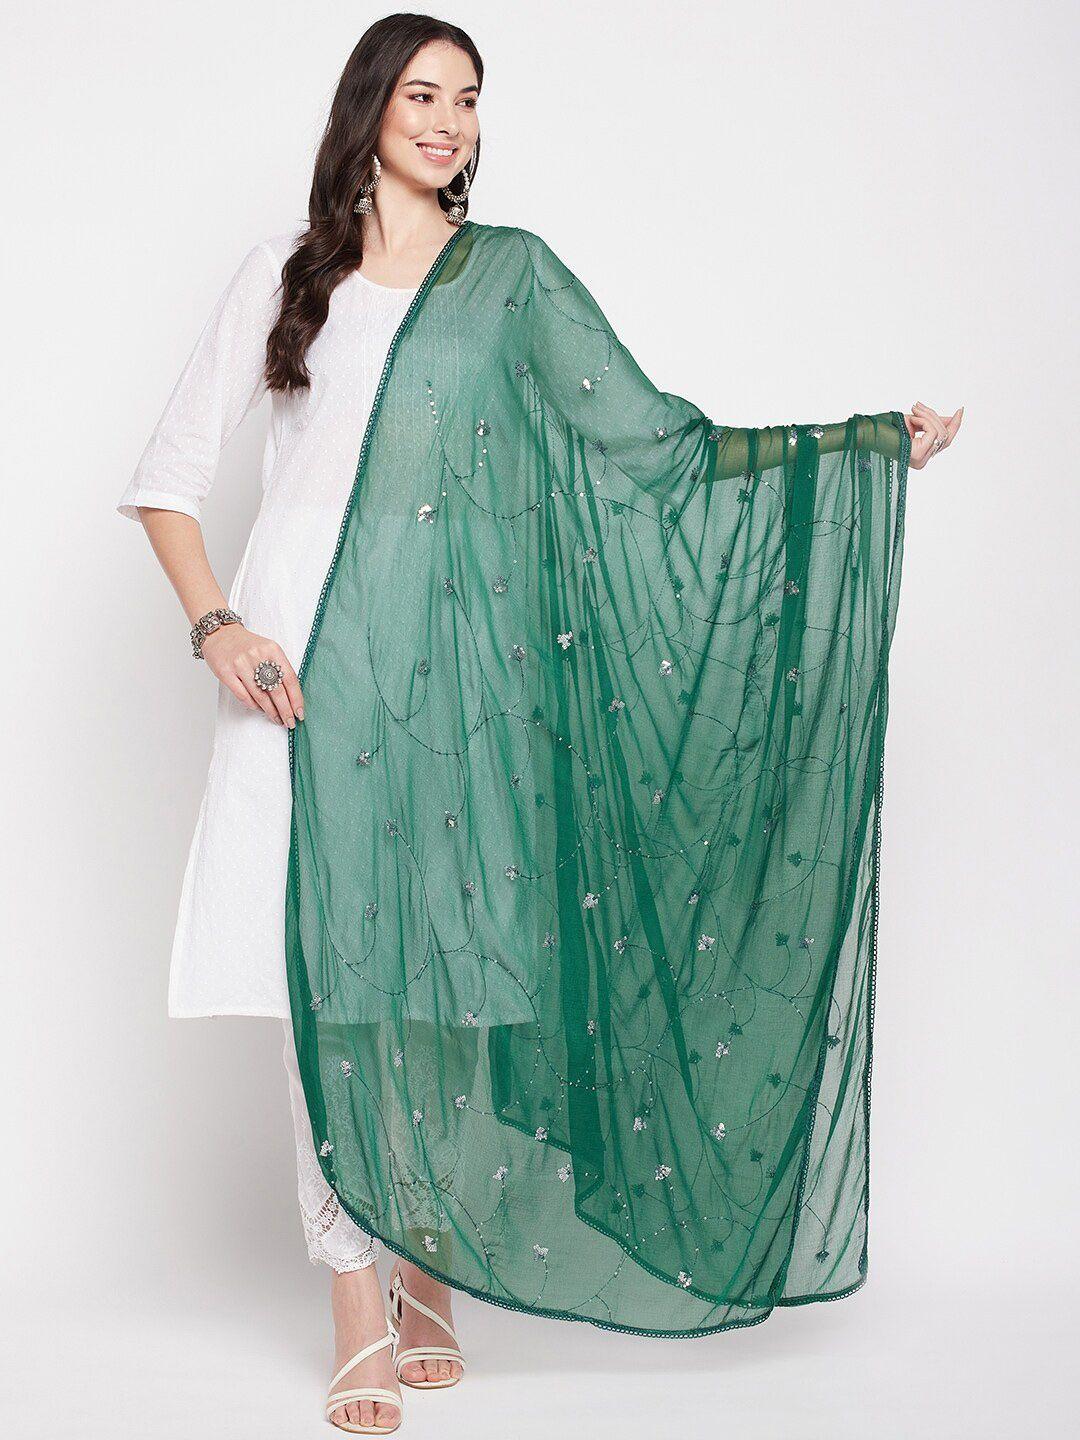 clora-creation-embroidered-dupatta-with-sequinned